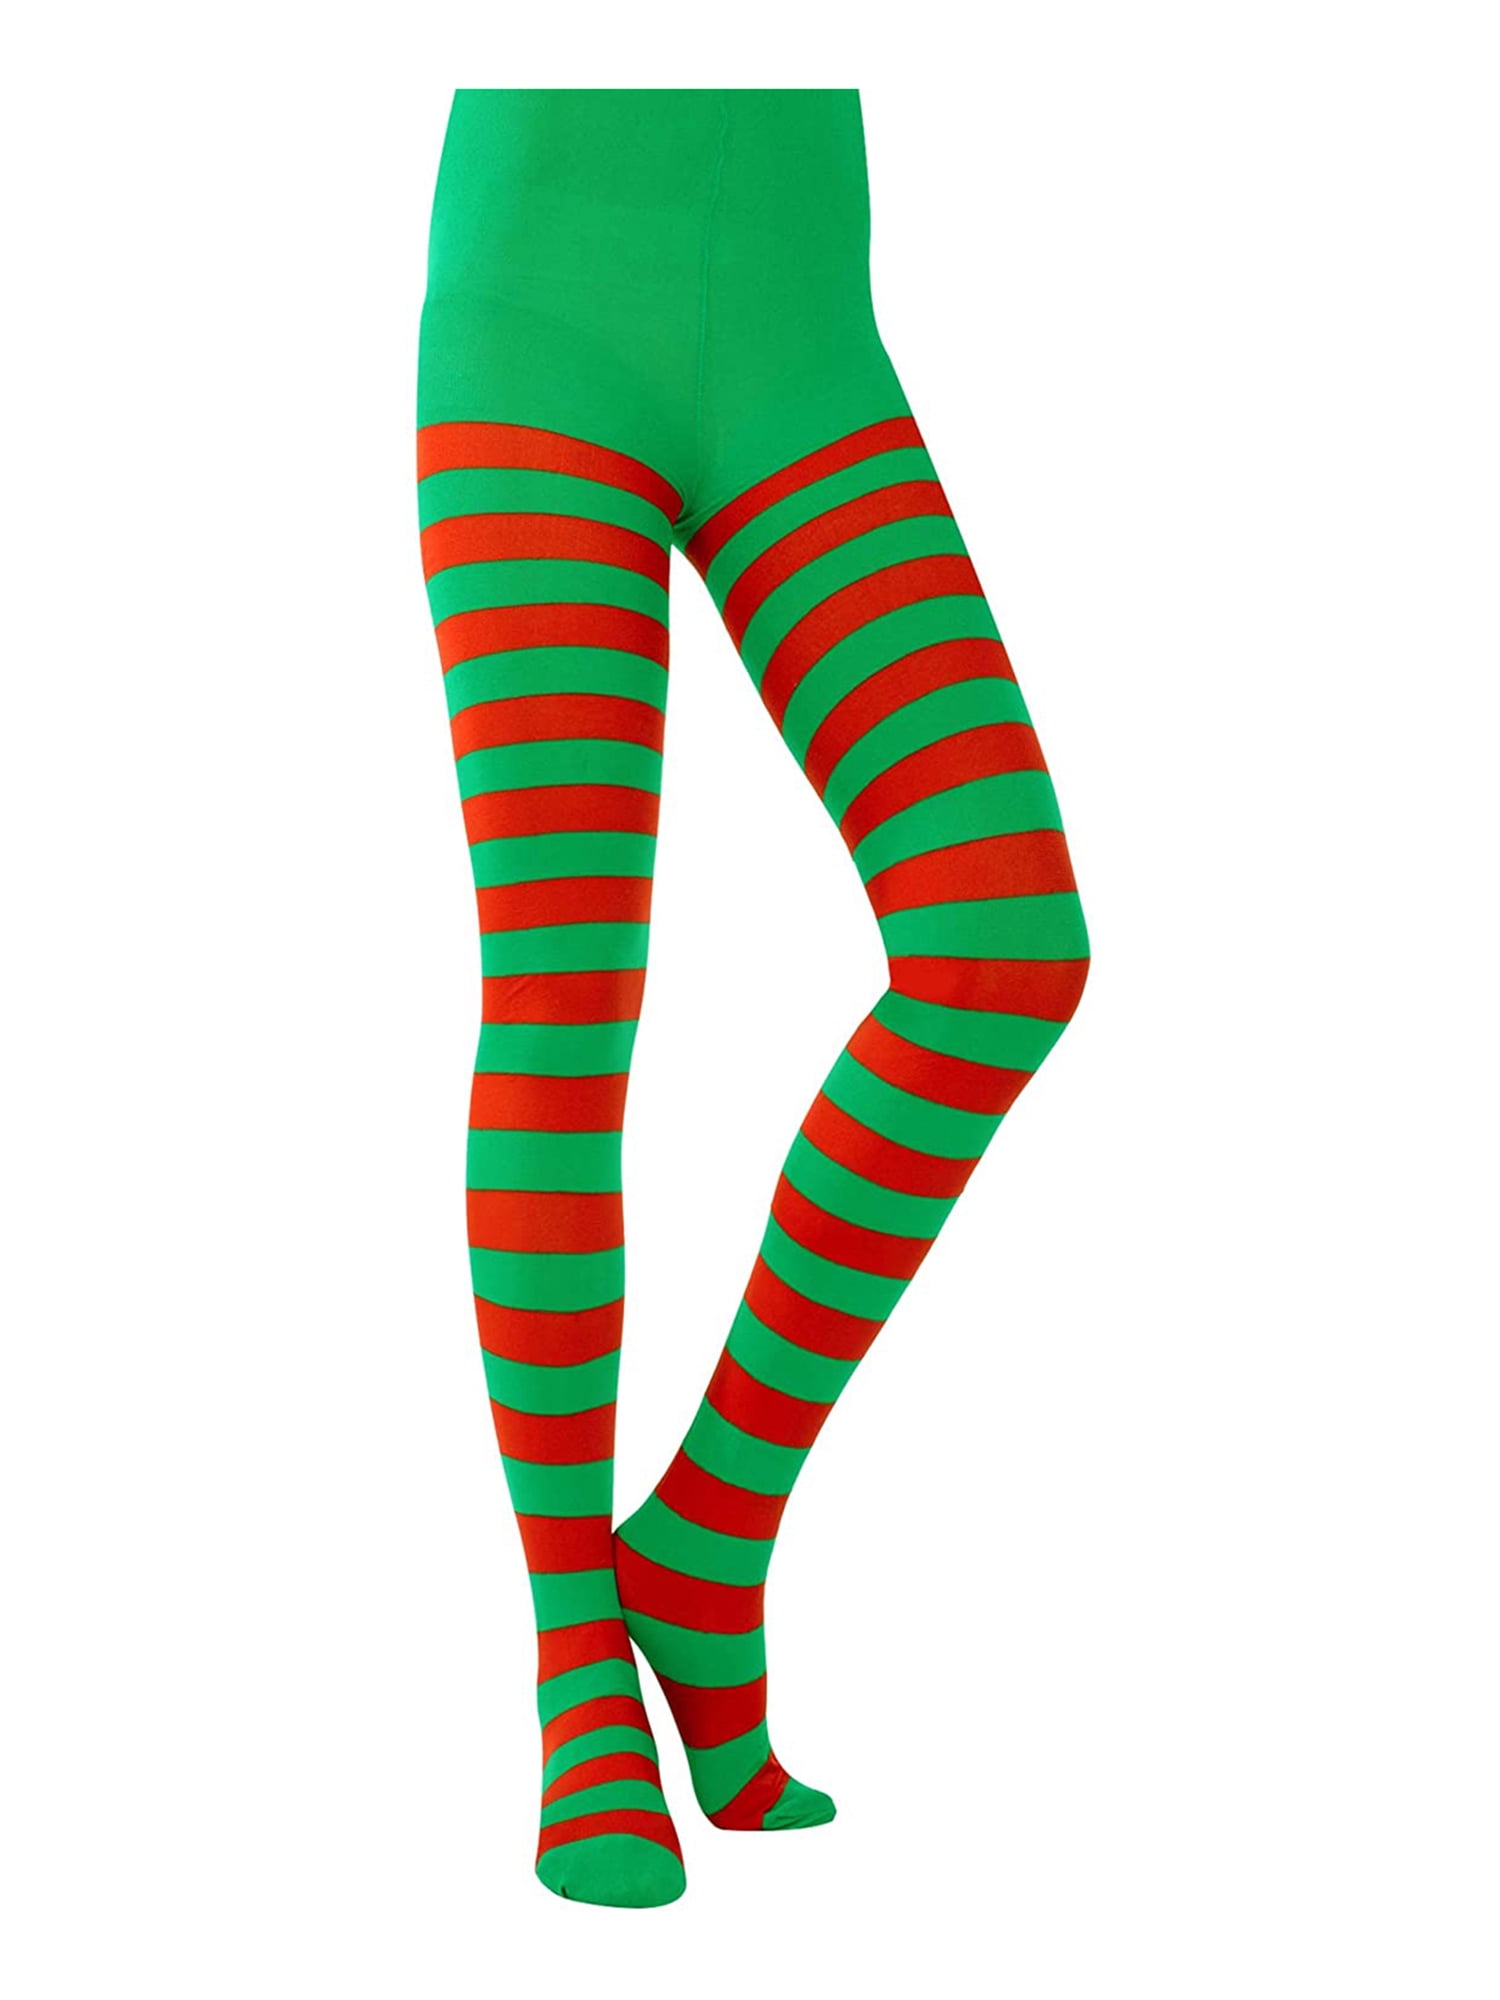 Koitniecer Christmas Striped Tights Full Length Tights Thigh High Stocking for Christmas Costume Accessory